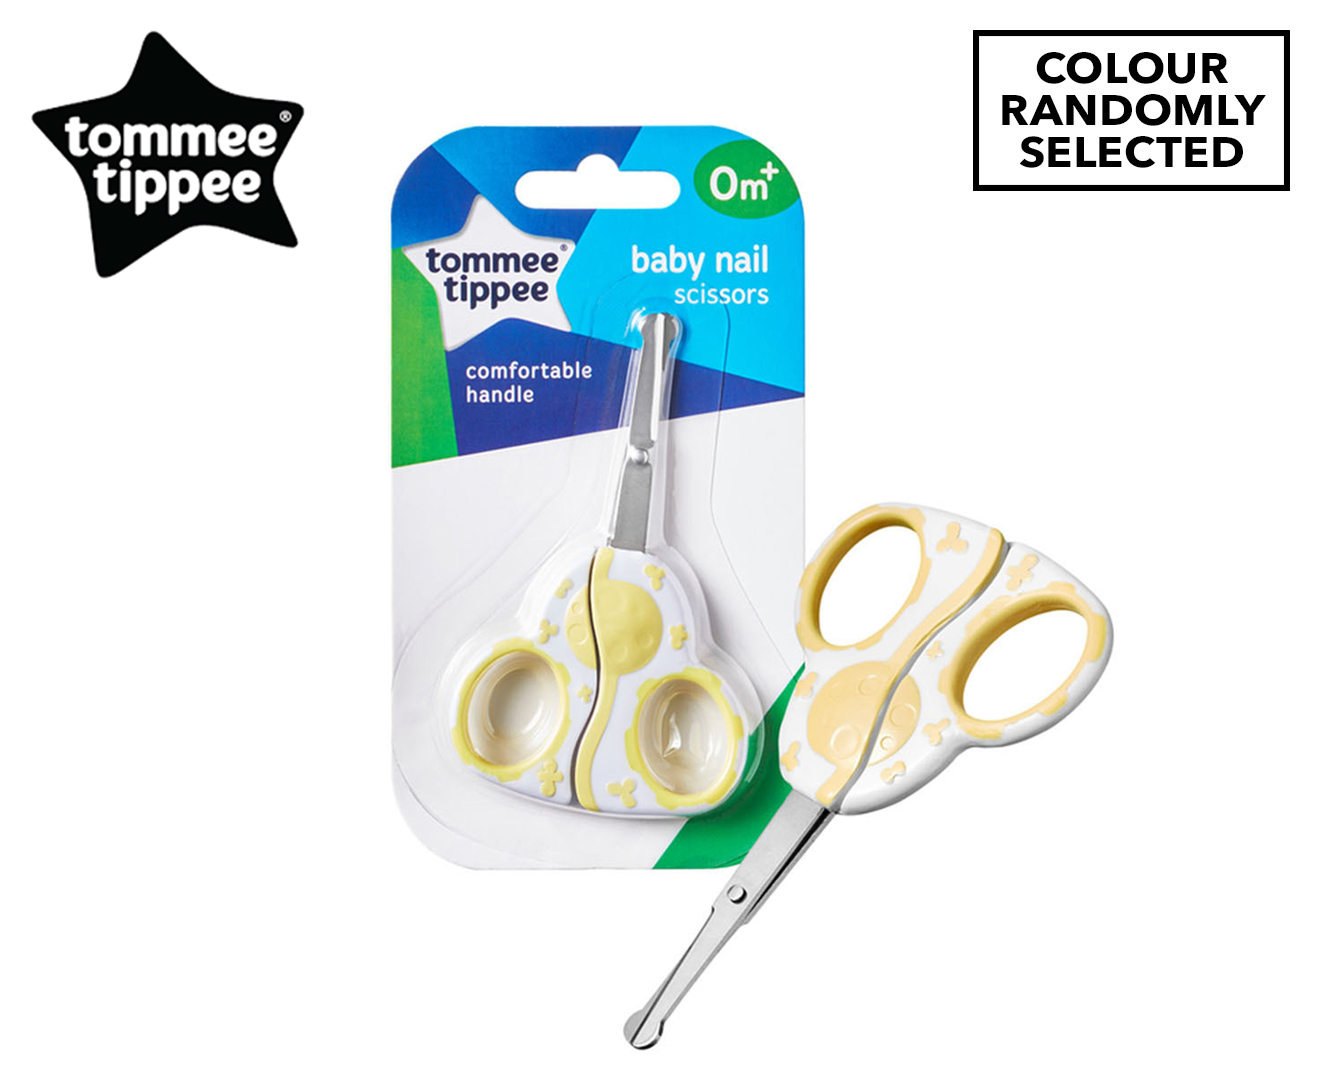 tommee tippee baby nail scissors